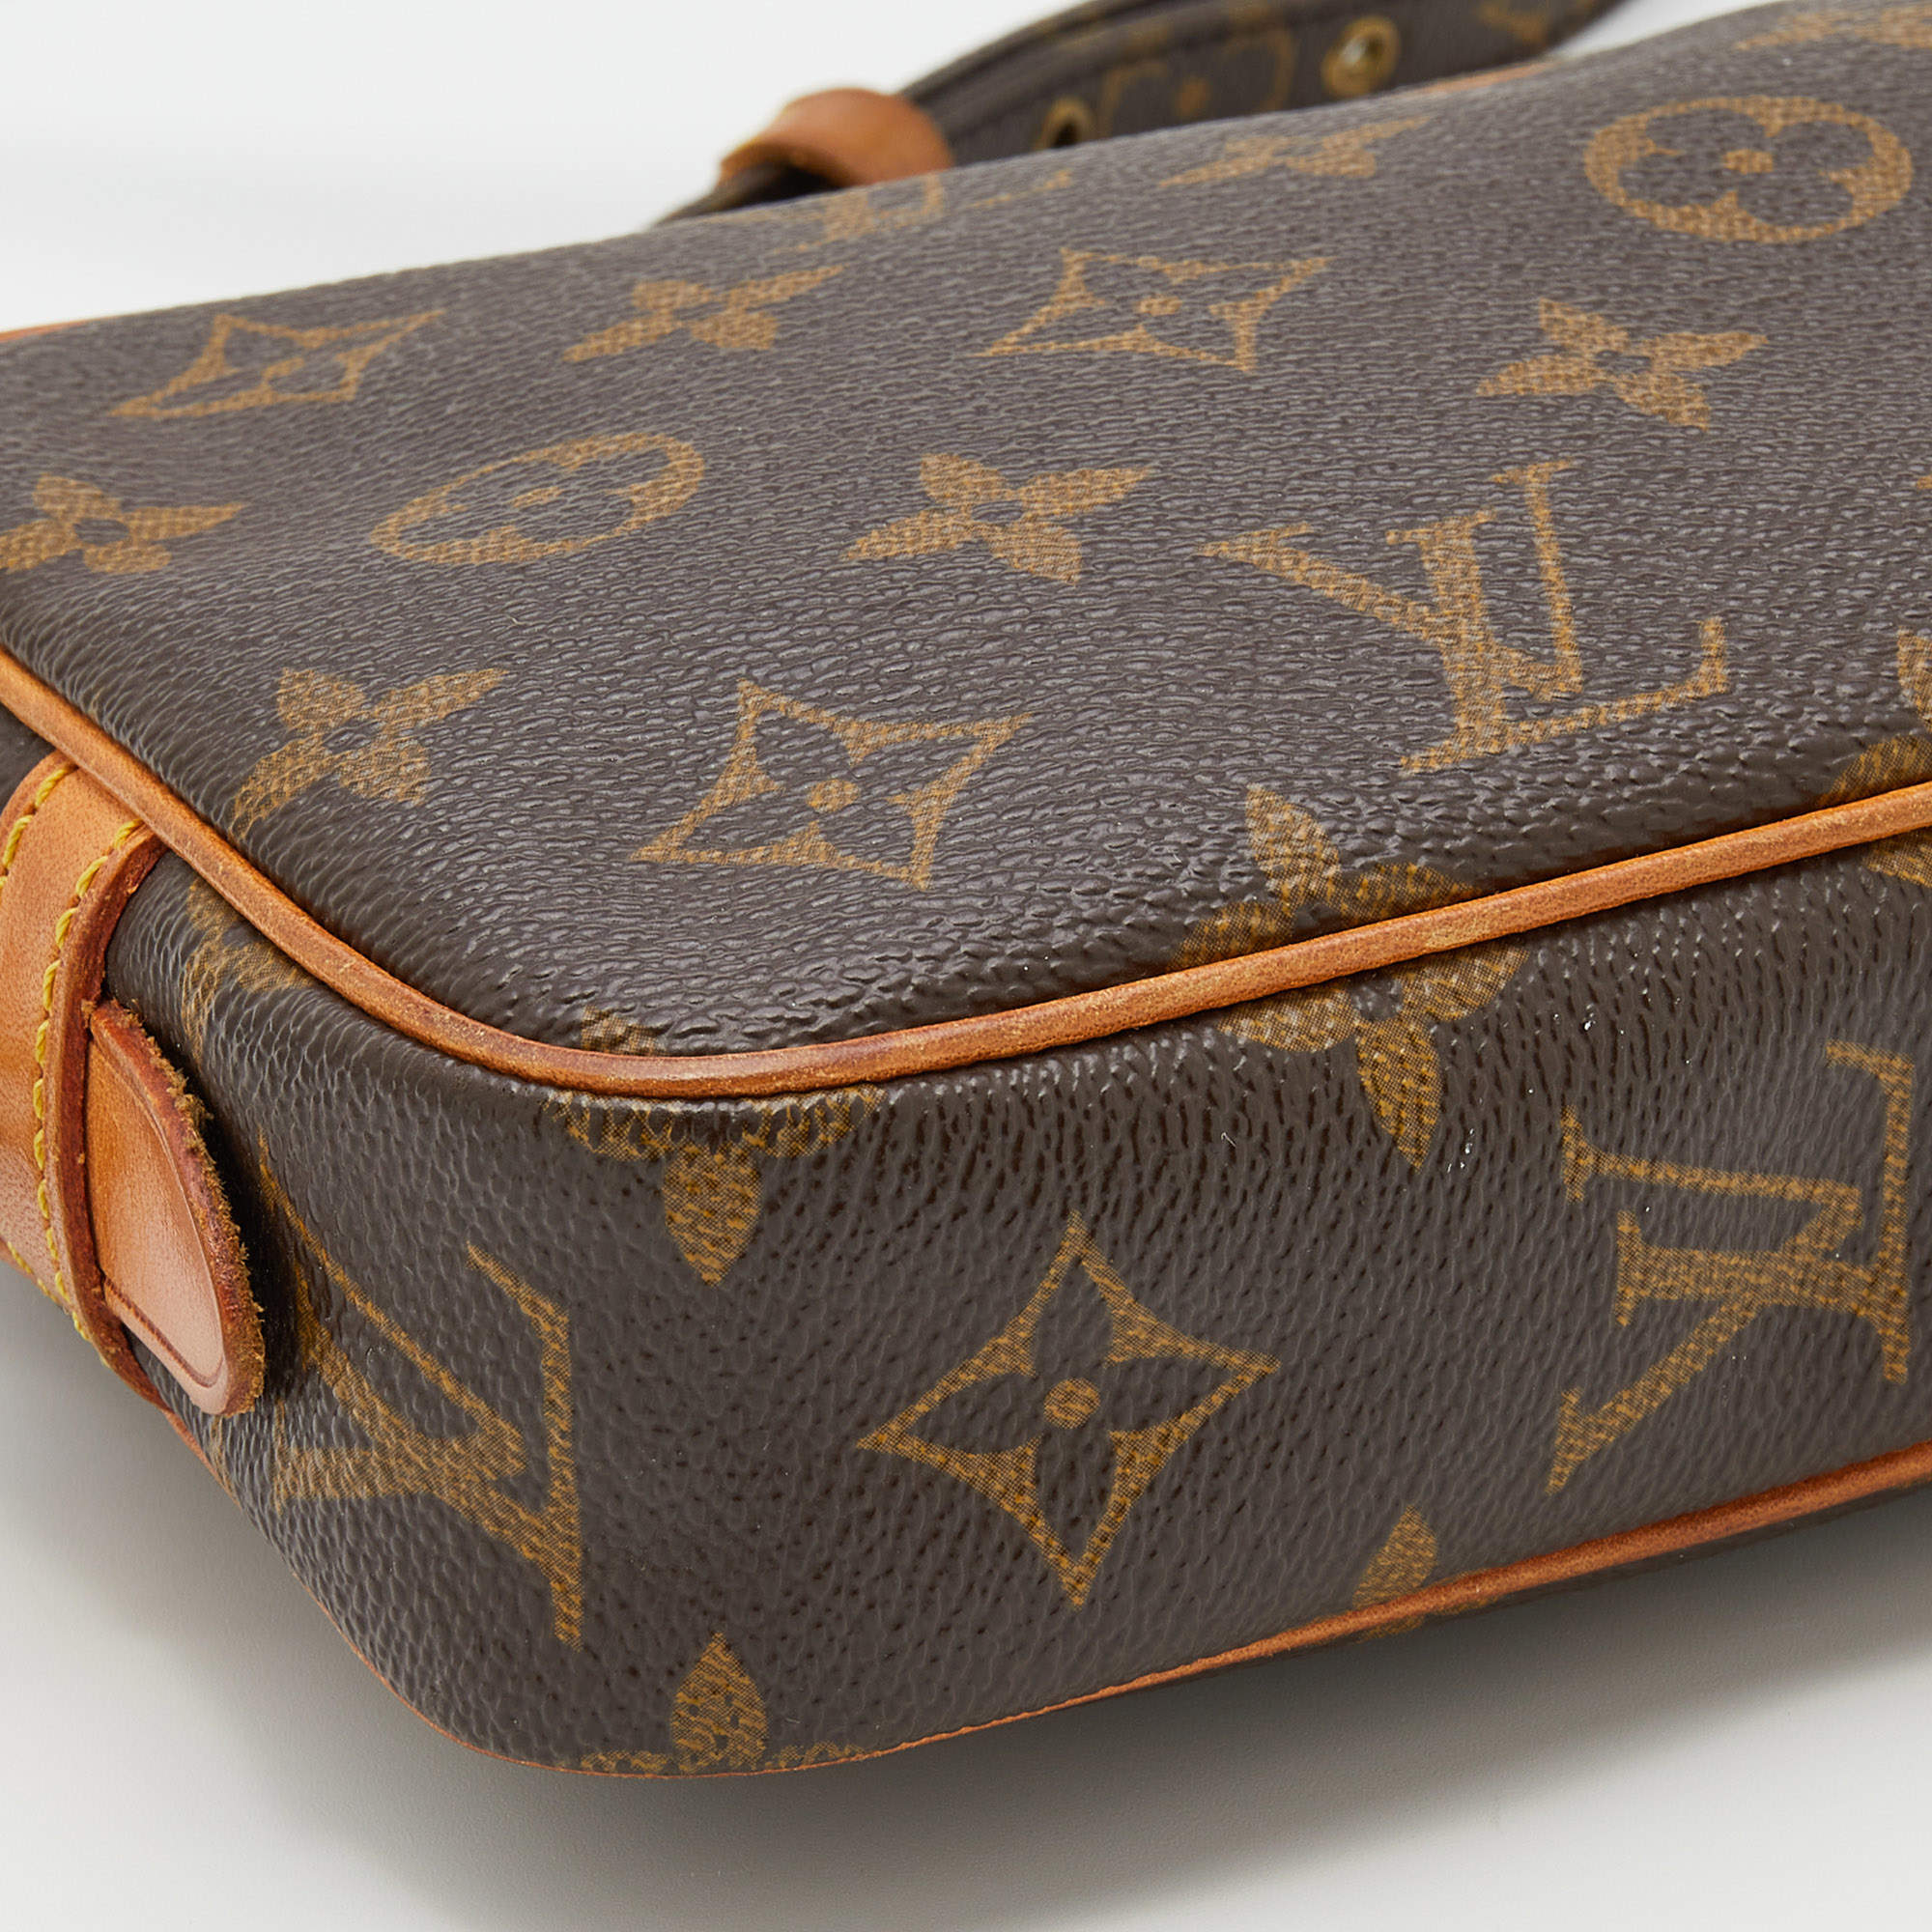 Monogram Pochette Marly Bandouliere – Loom & Magpie Boutique